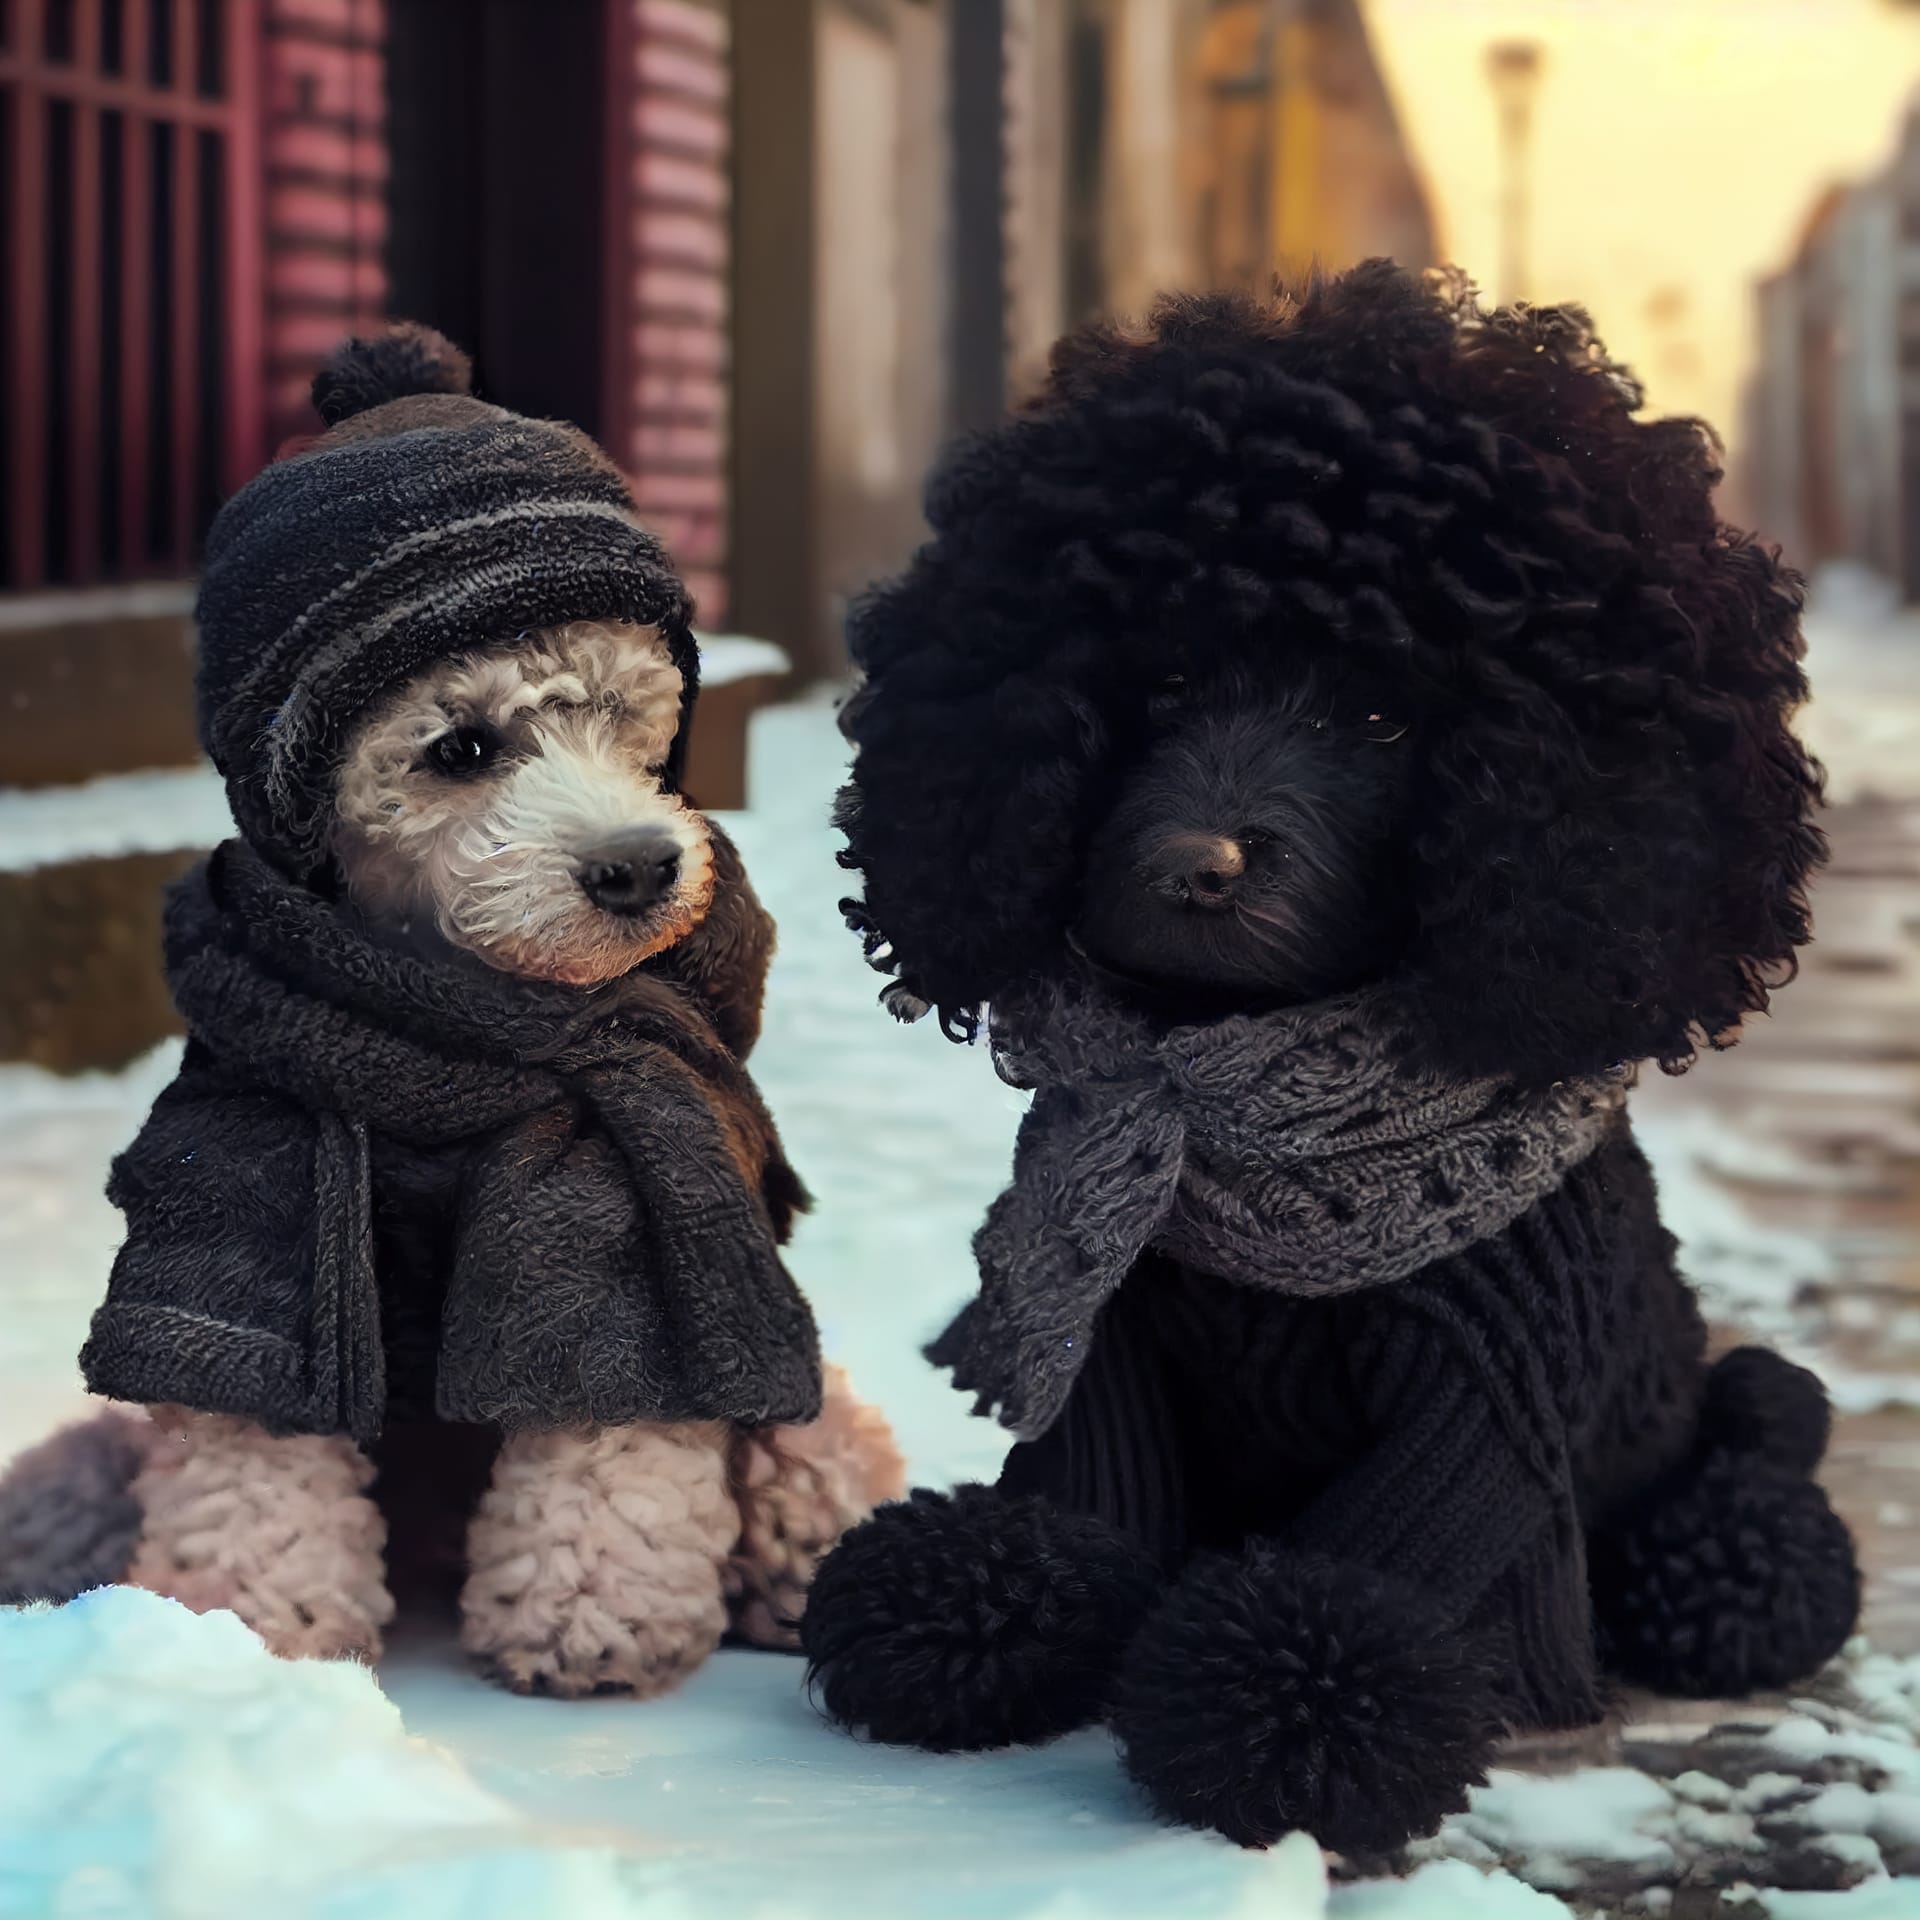 Poodle dogs black white knitted hat scarfs sitting winter street